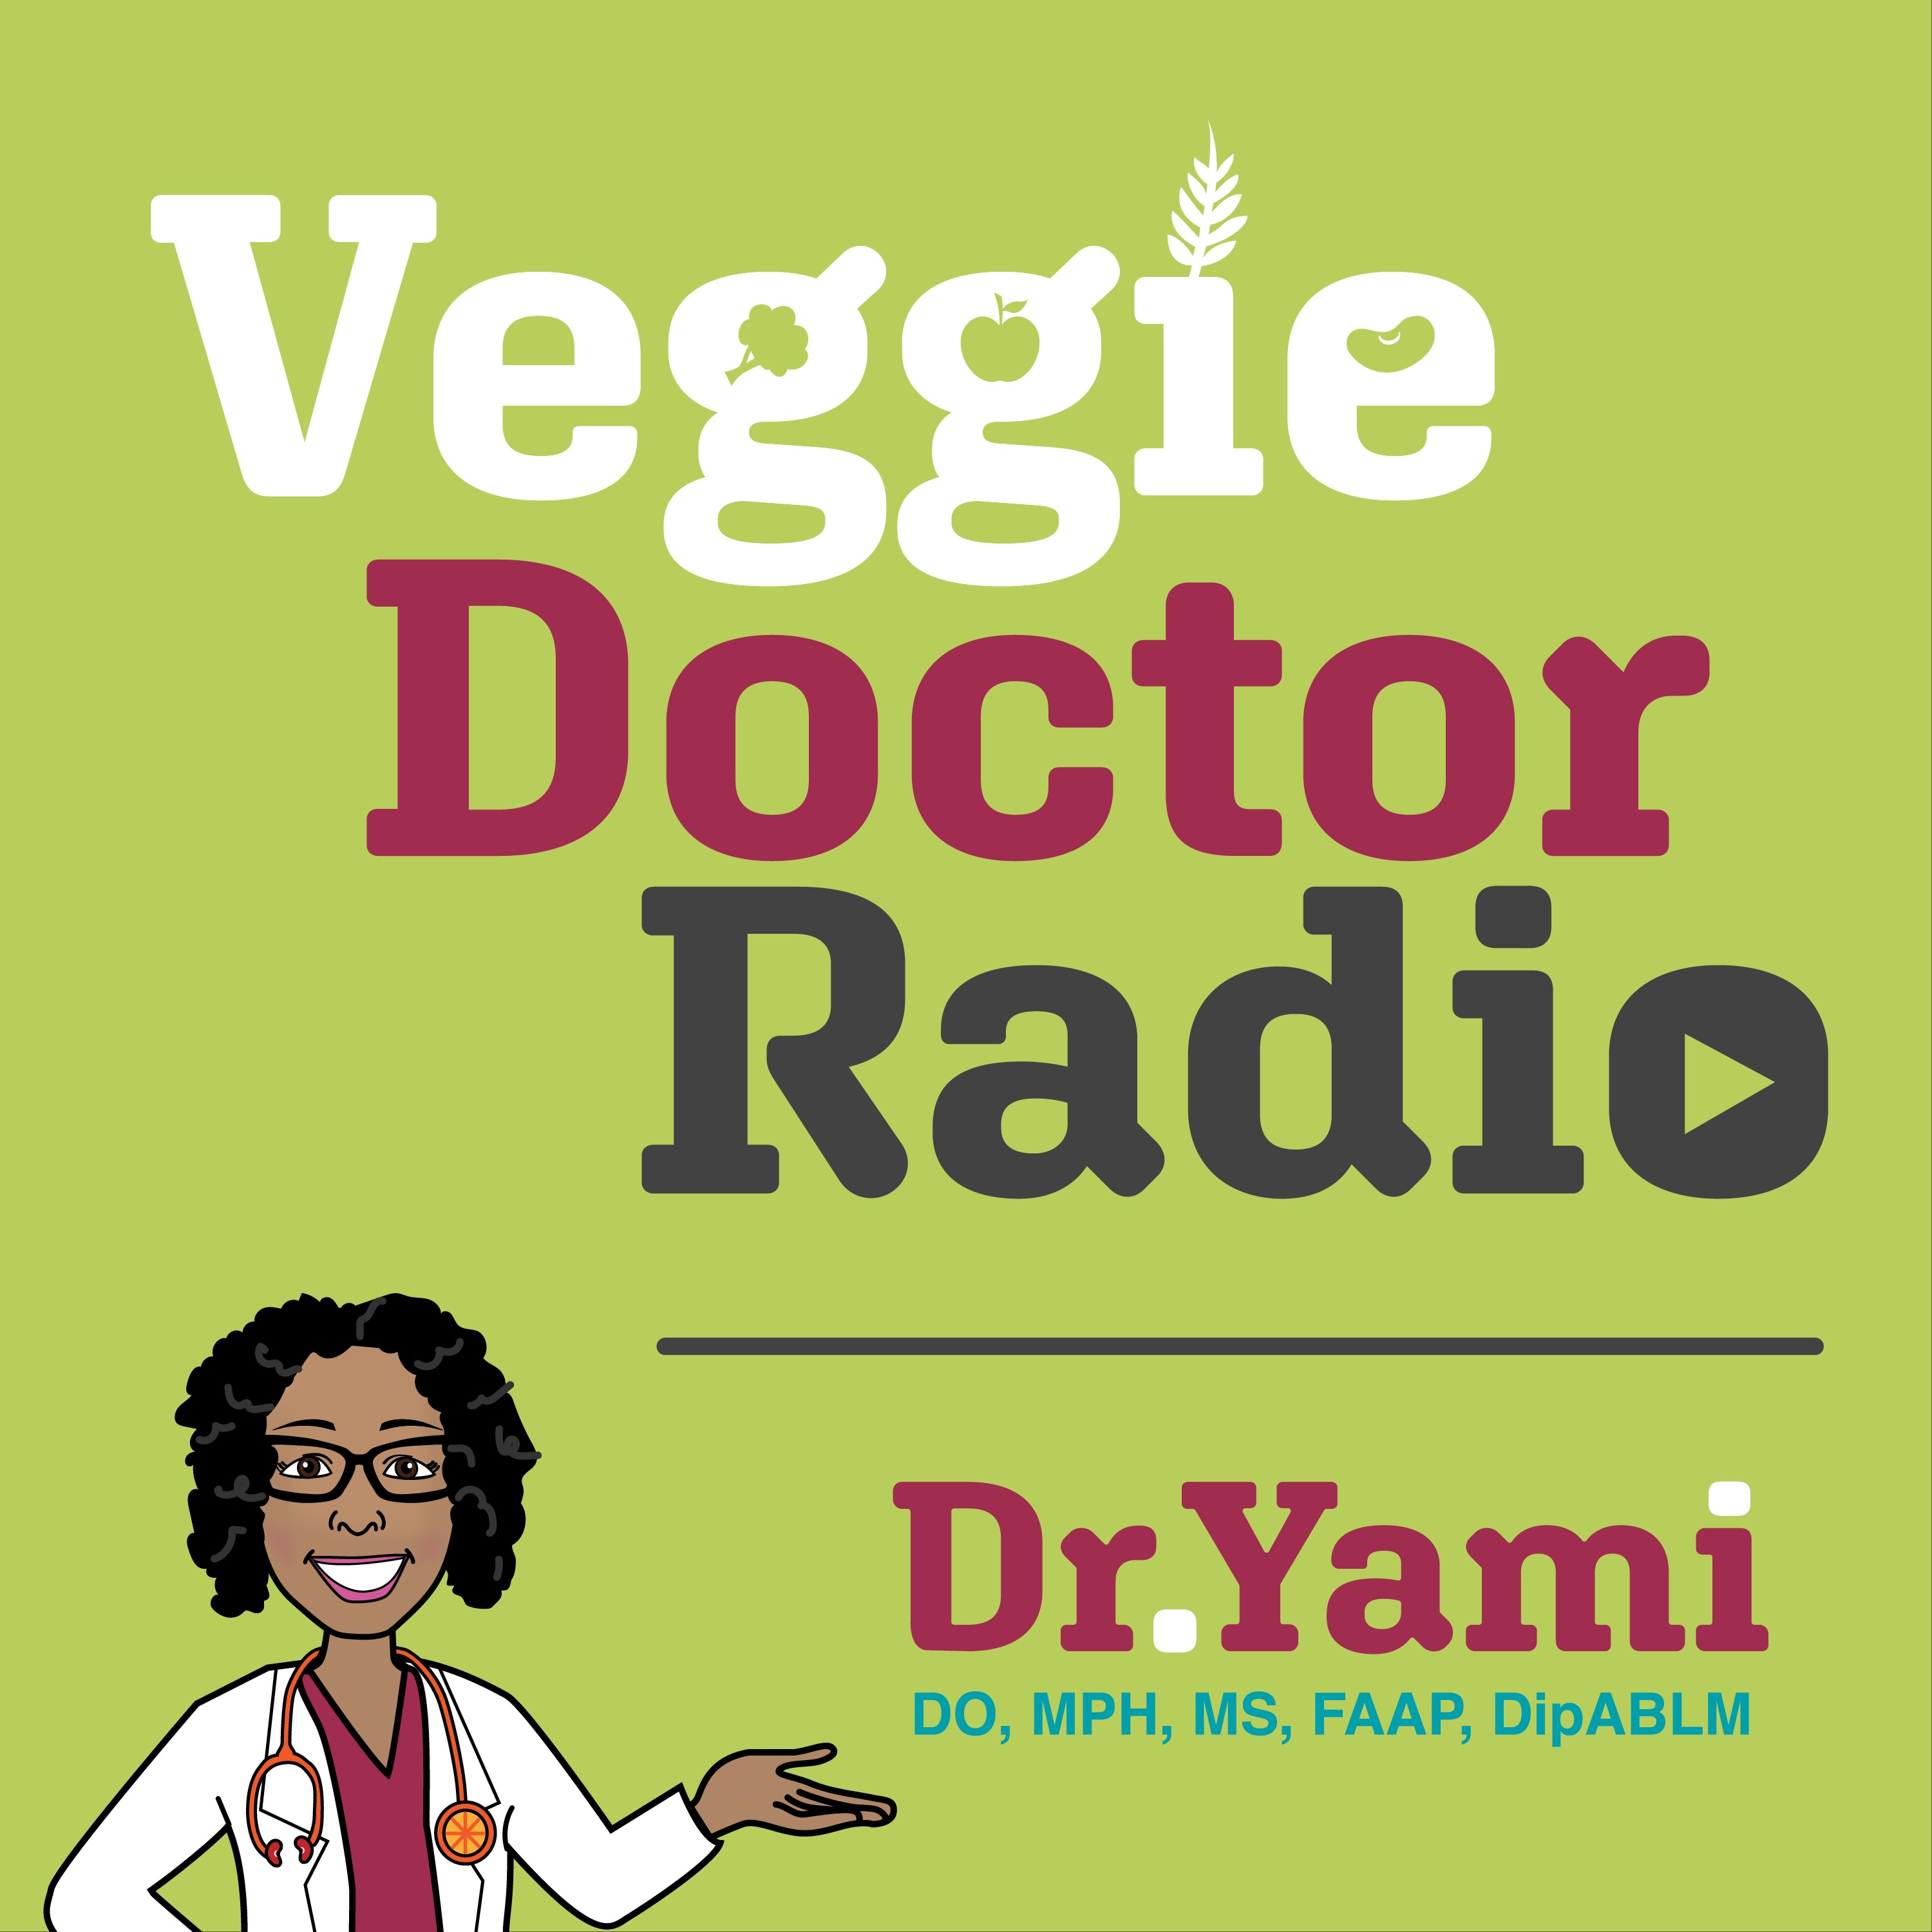 225: How you can RISE above stress with Trudy Stone (Veggie Doctor Radio)